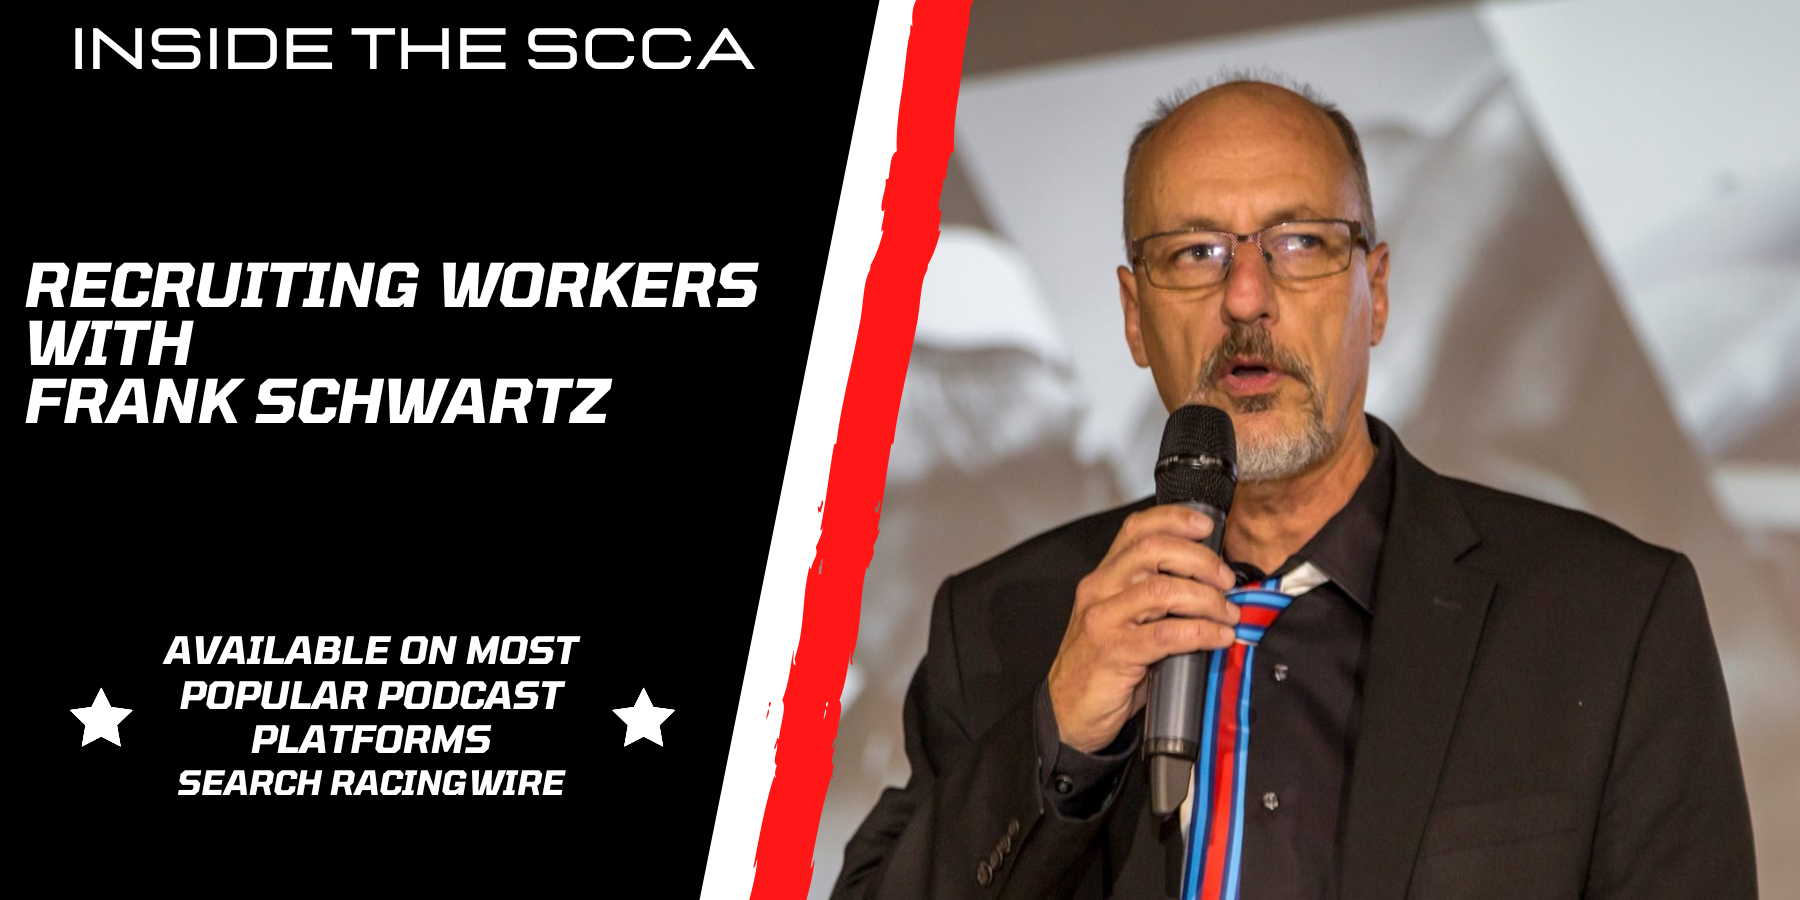 Inside the SCCA: Recruiting Workers, with Frank Schwartz